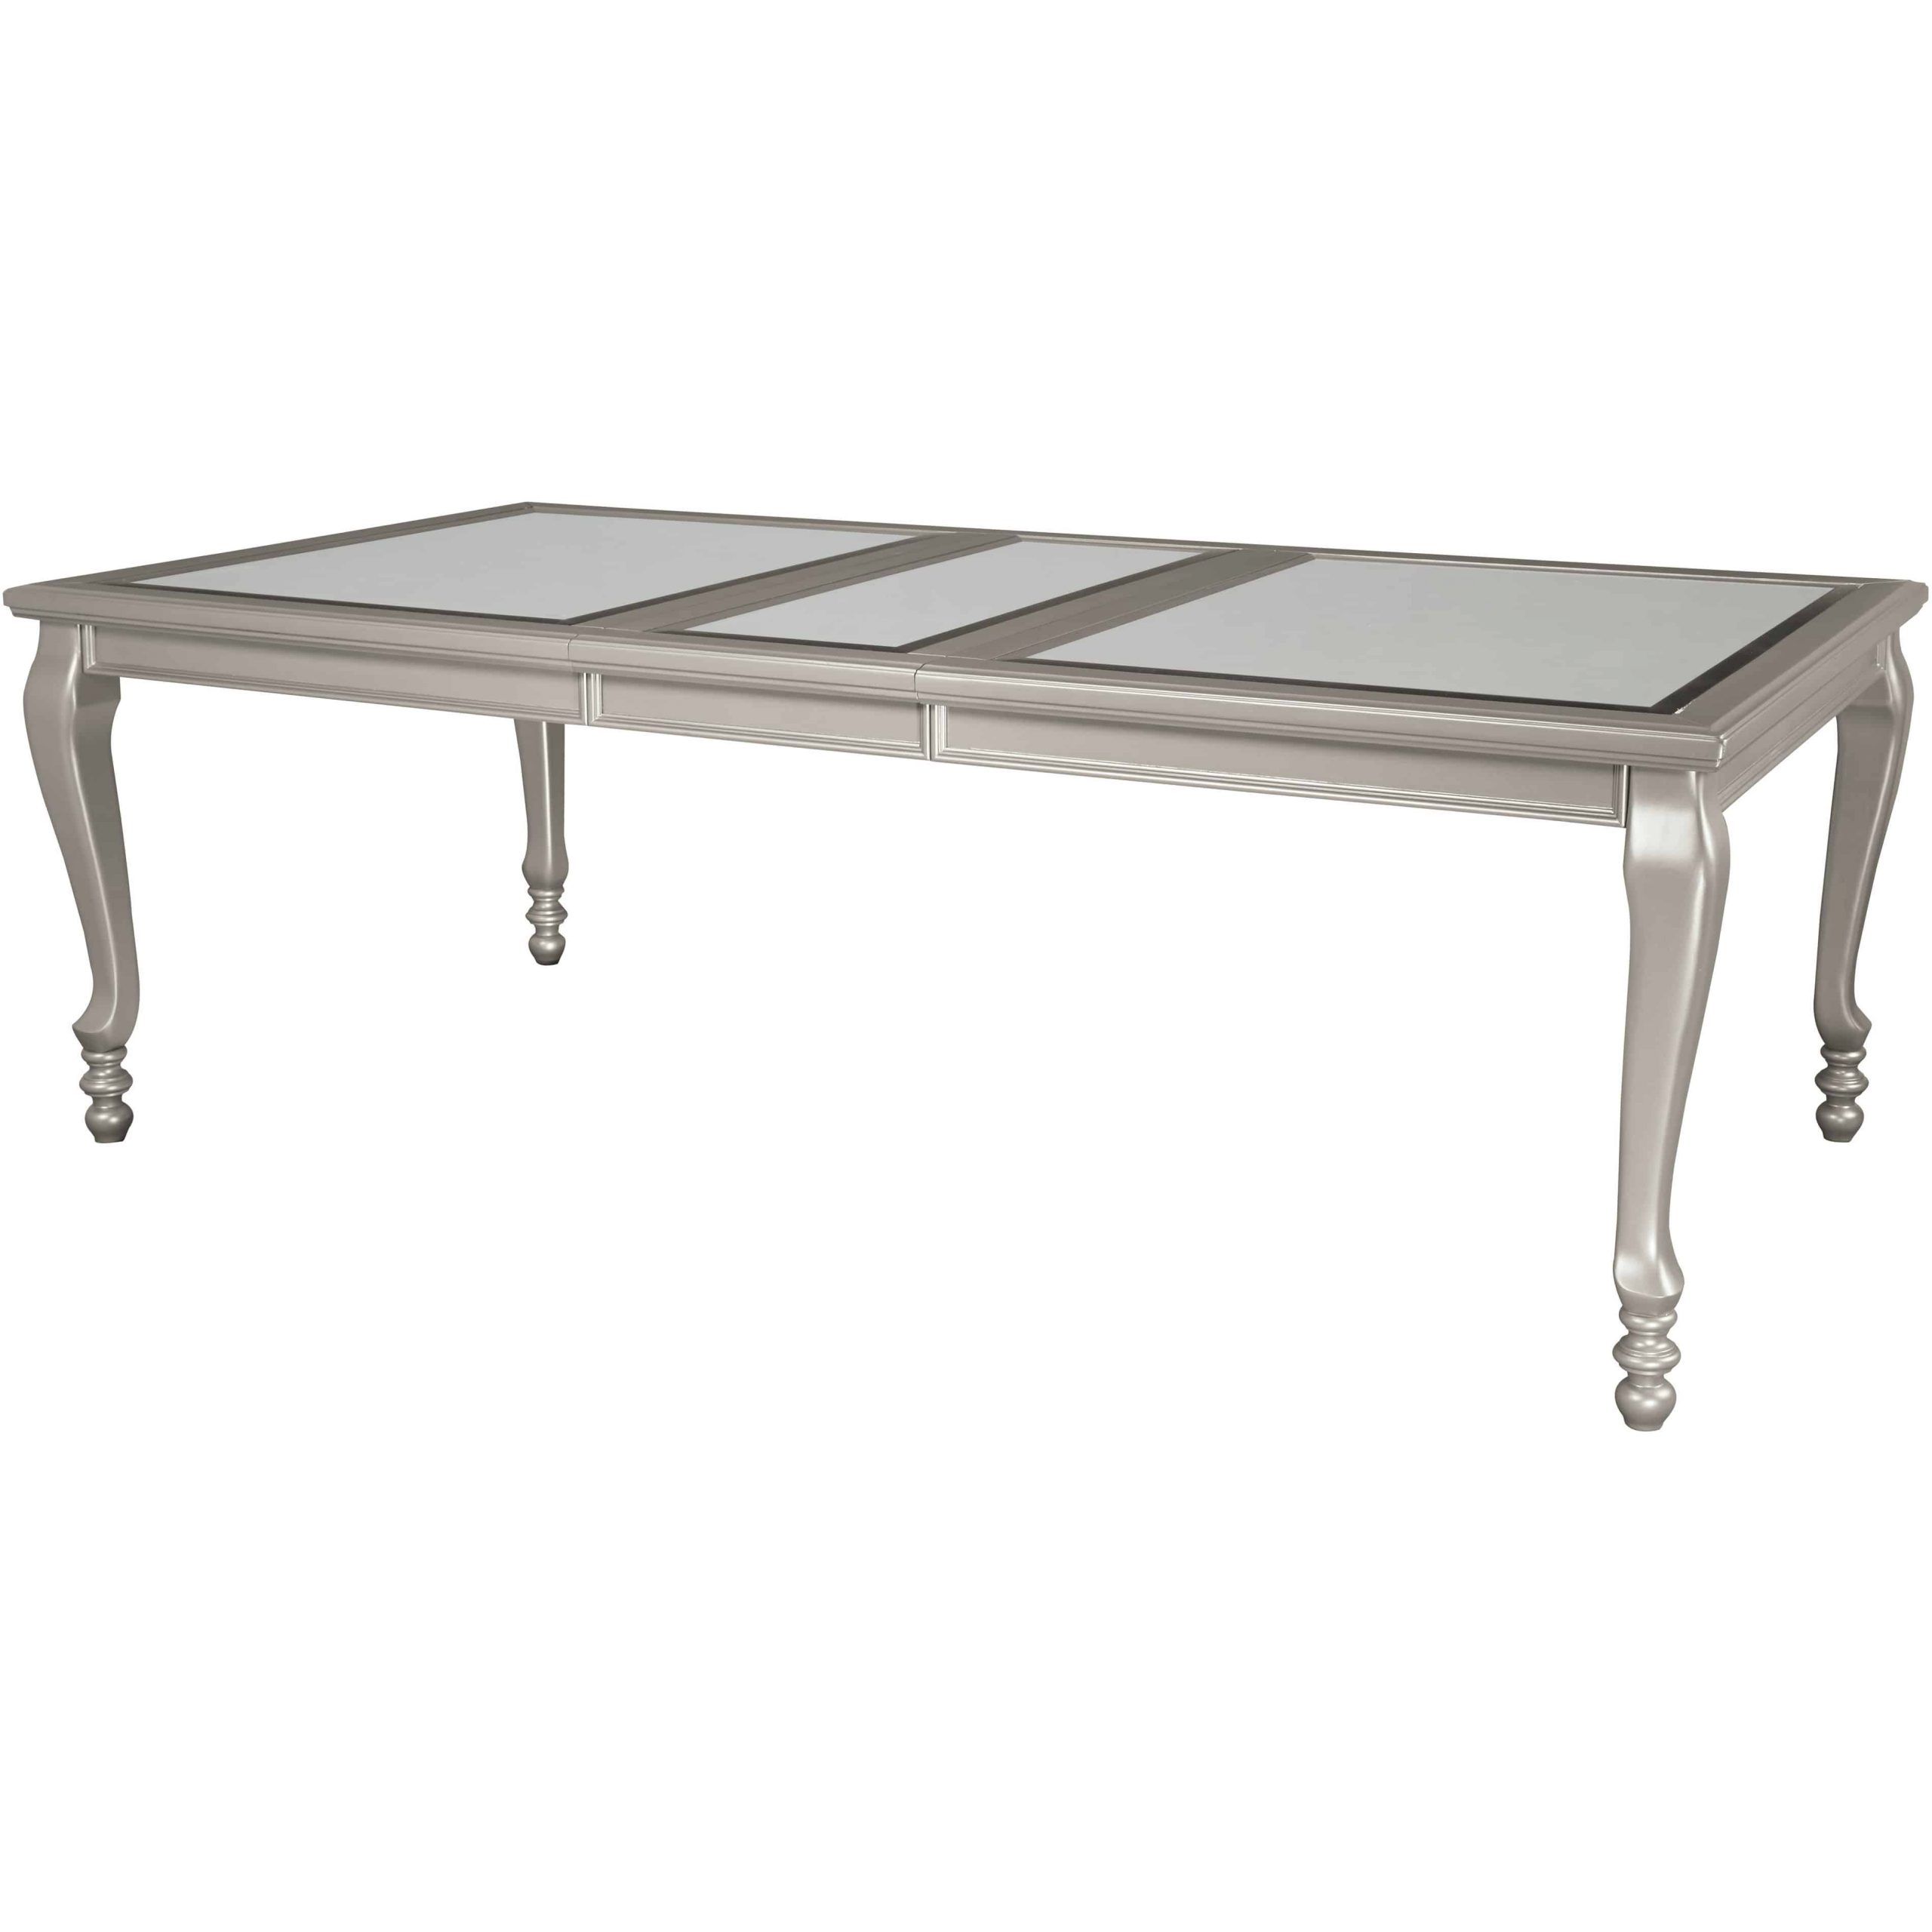 Coralayne Rectangular Dining Room Extension Table Intended For Most Up To Date Baring 35'' Dining Tables (View 17 of 20)